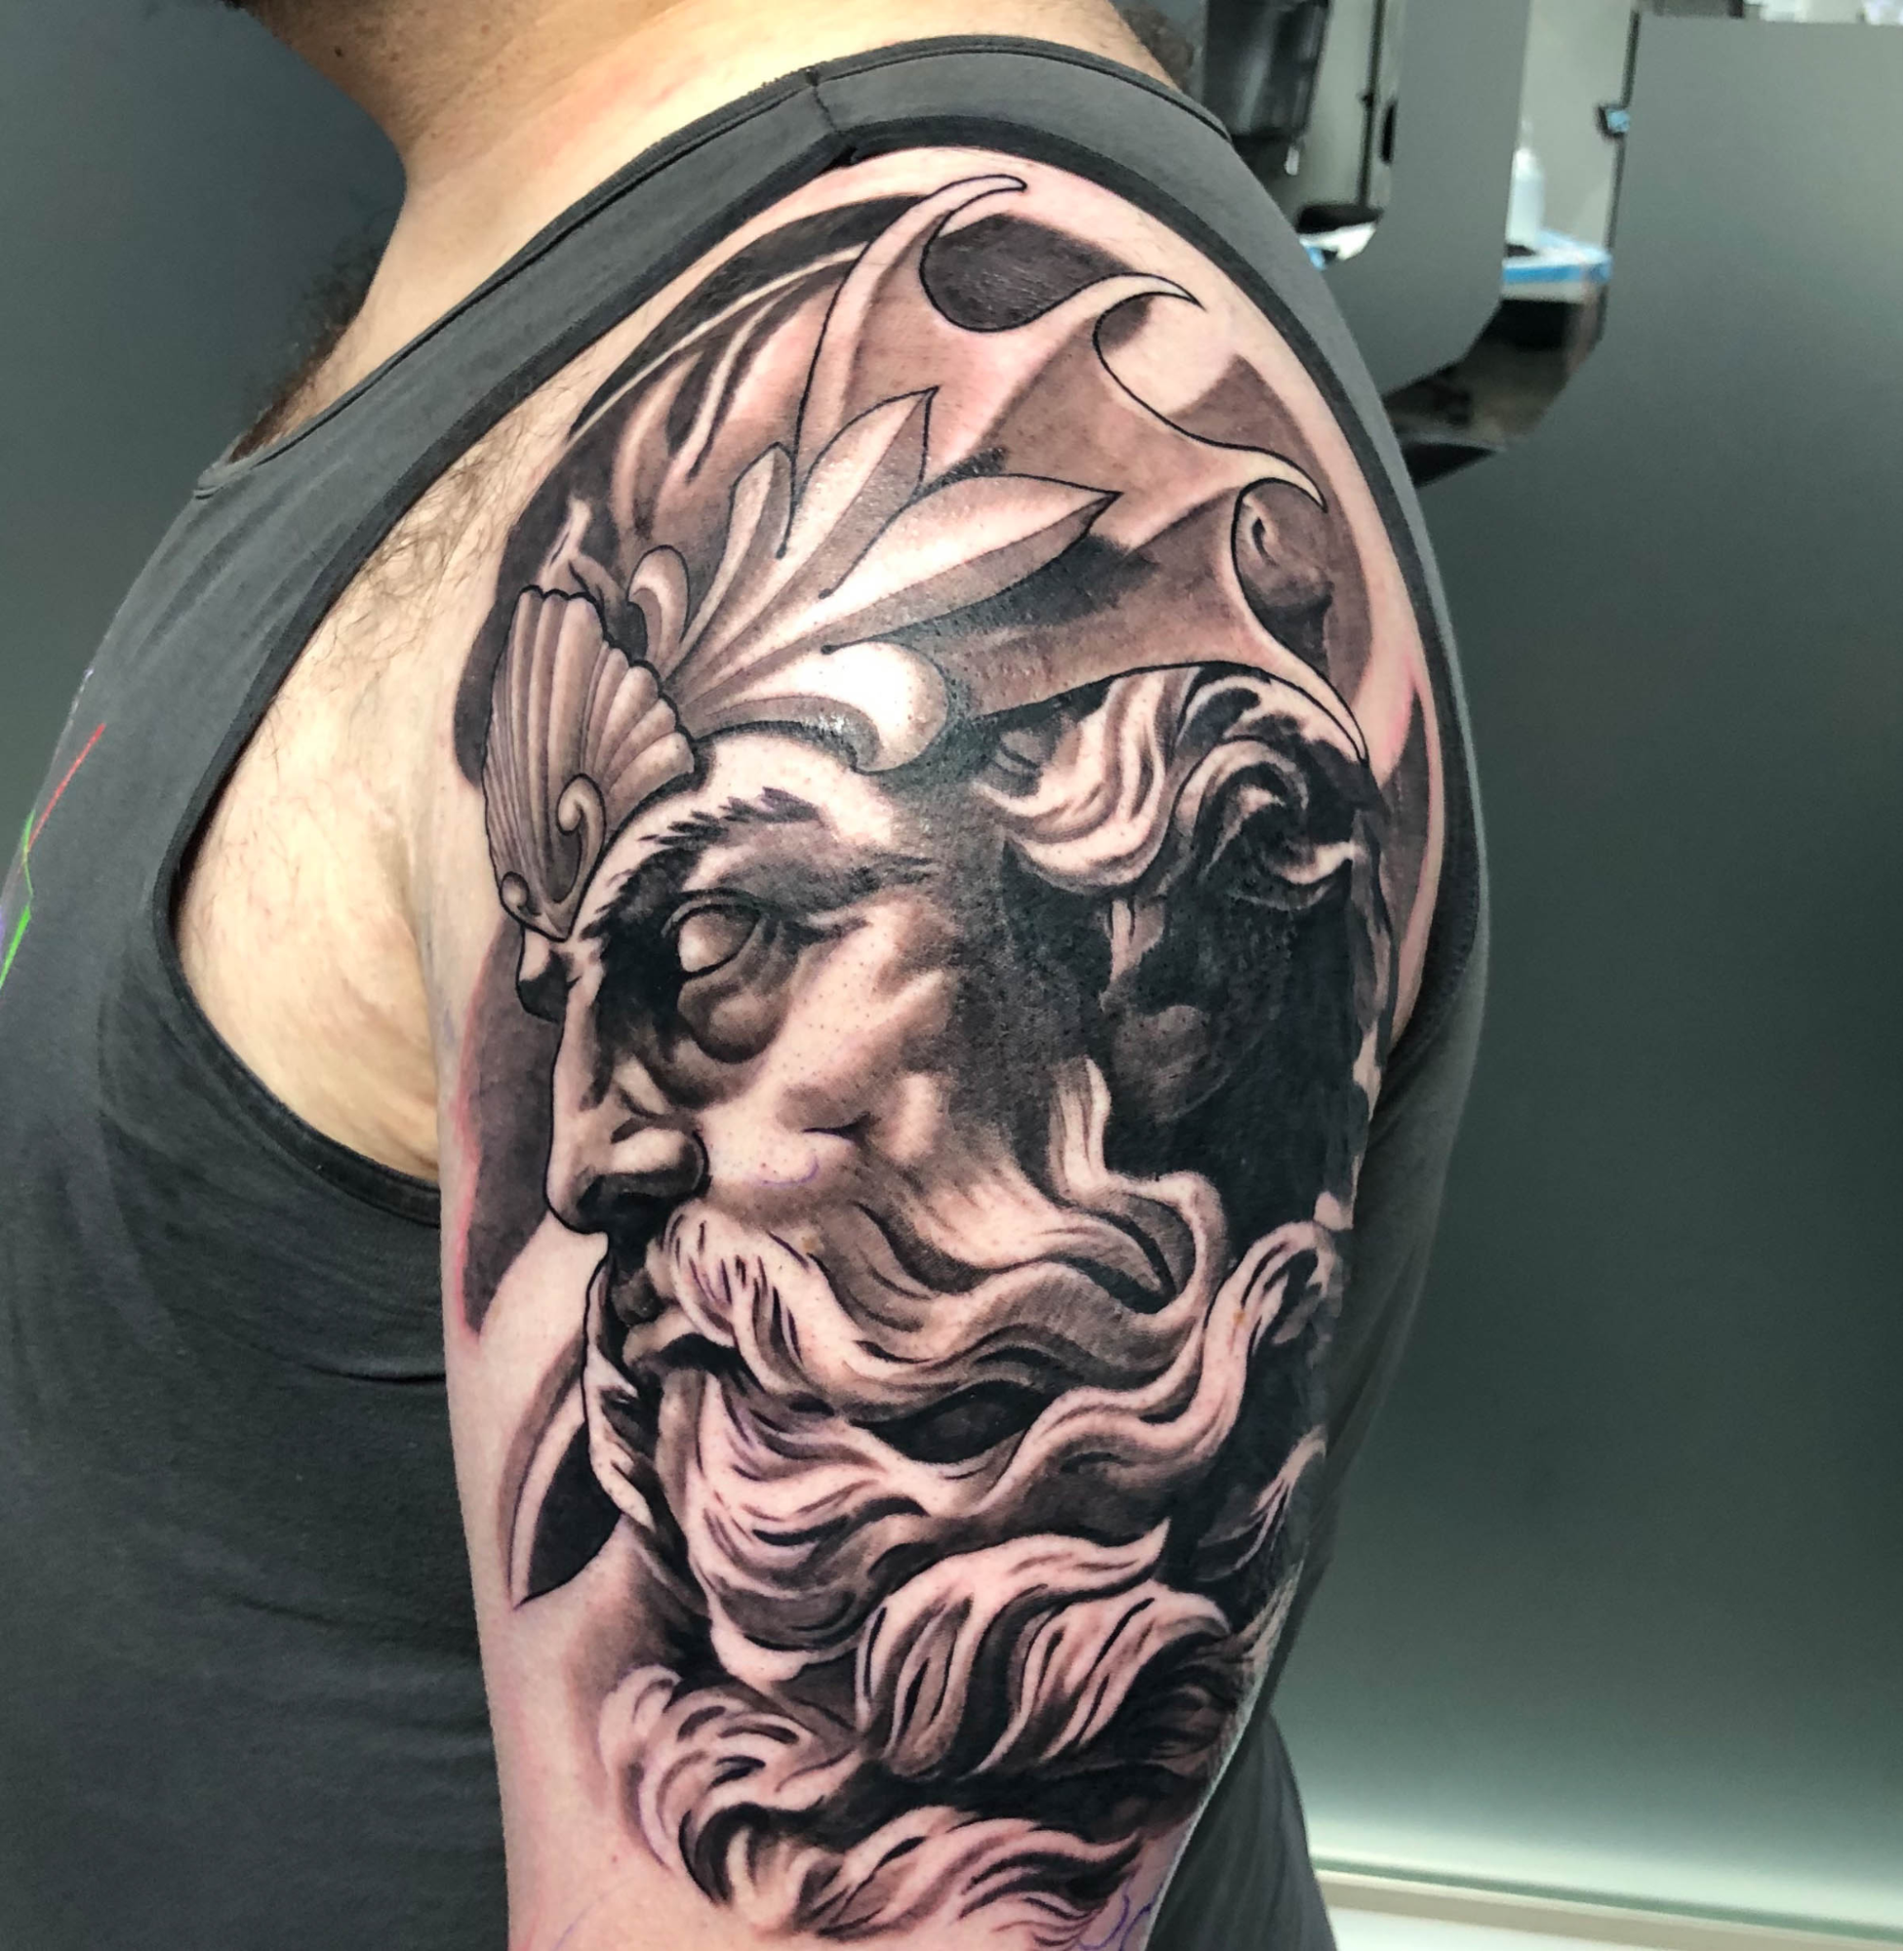 Ares god of war inspired piece to add on to this sleeve  Booking  MayJuly send a message with your ideas  Instagram